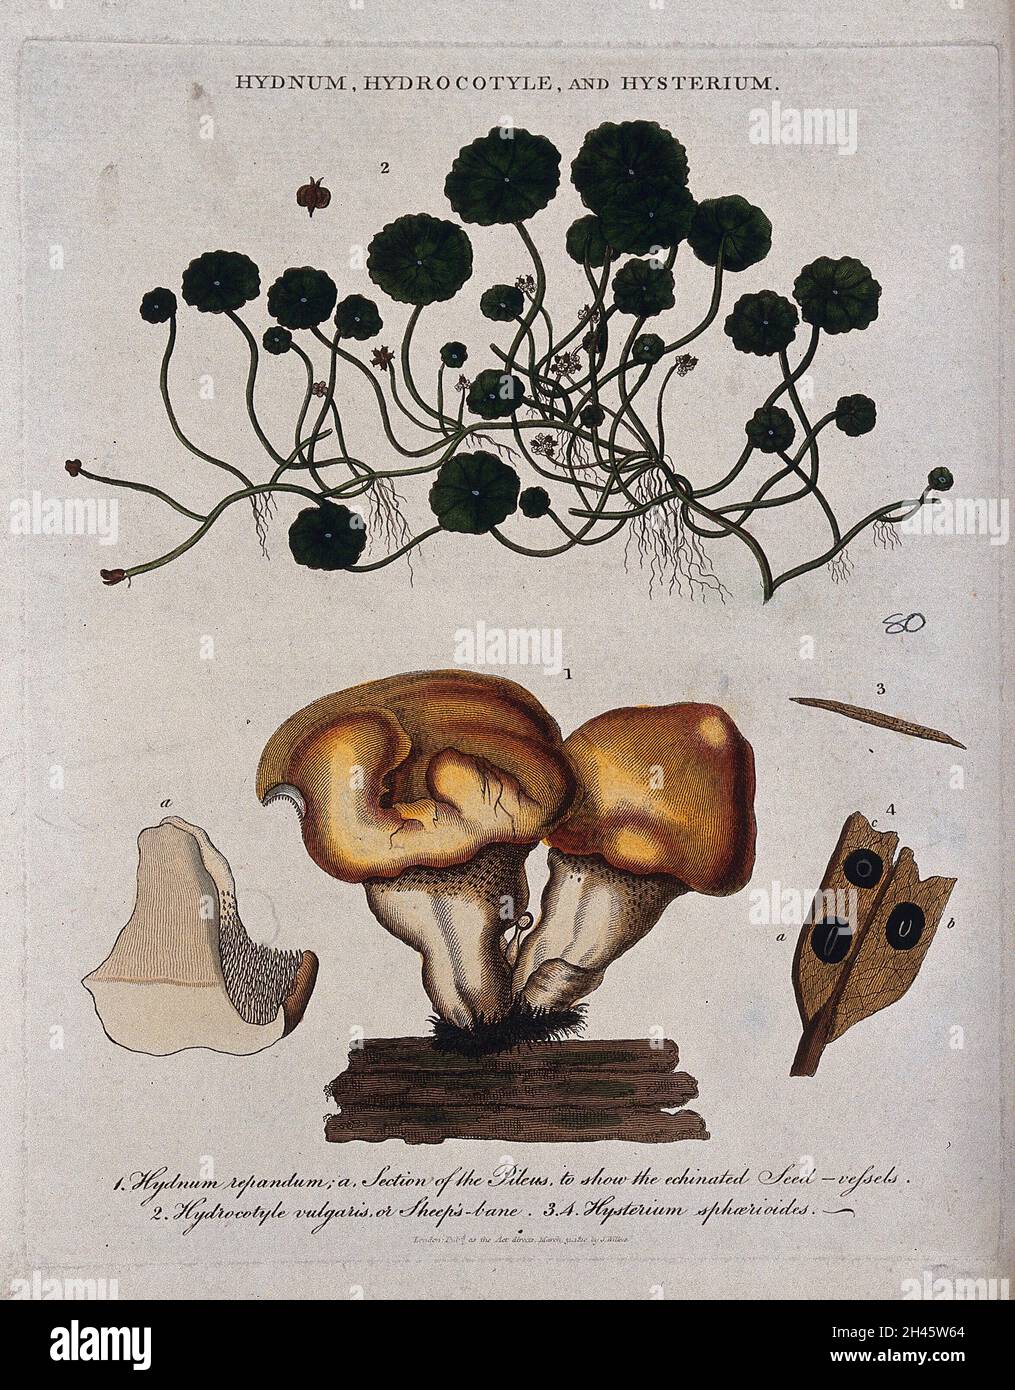 Wood hedgehog fungus (Hydnum repandum), pennywort plant (Hydrocotyle species) and a sac fungus (Hysterium sphaerioides). Coloured etching by J. Pass, c. 1810. Stock Photo